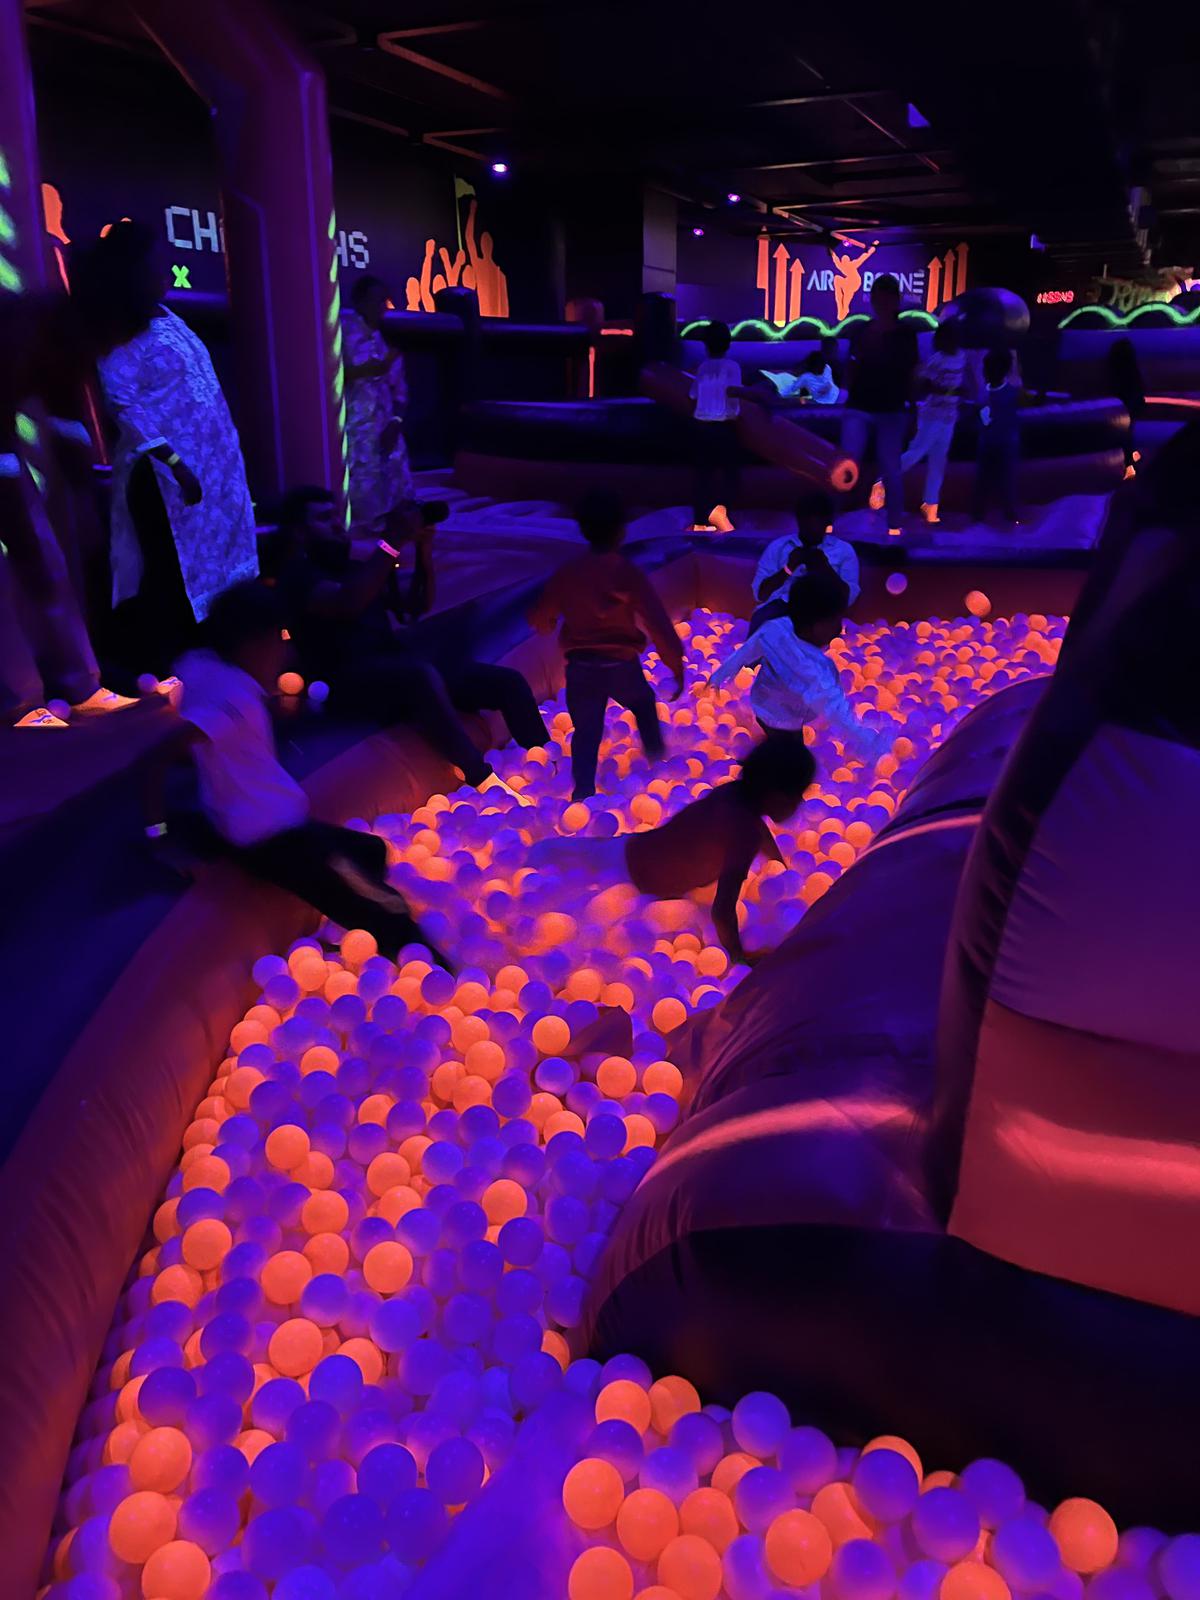 At Airborne also enjoy a glow-in-the-dark experience